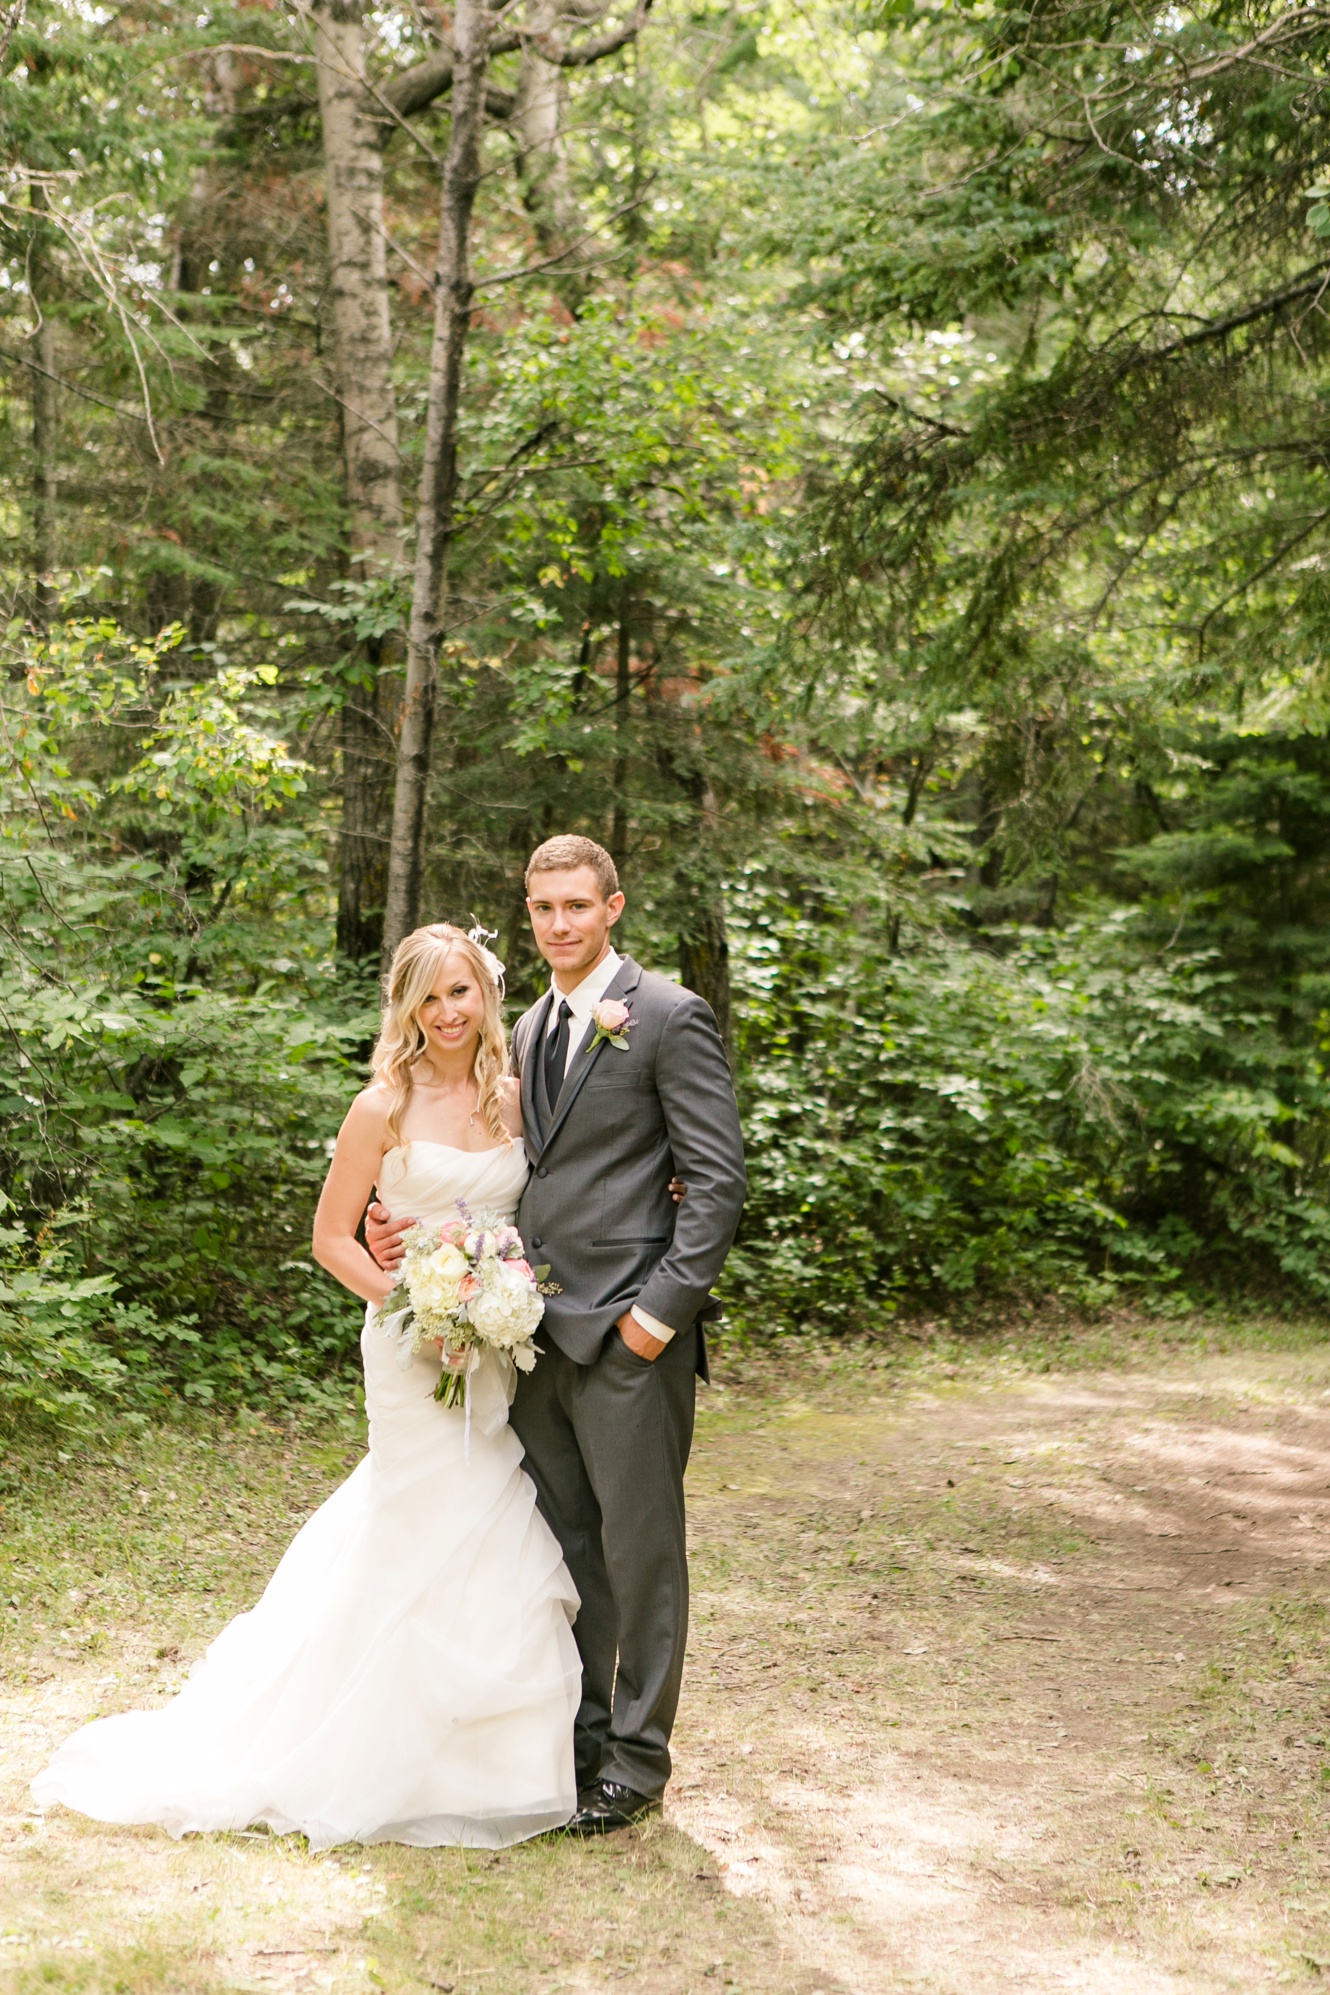 Vintage Enchanted Forest Fairytale Wedding with Kristen Booth Photography